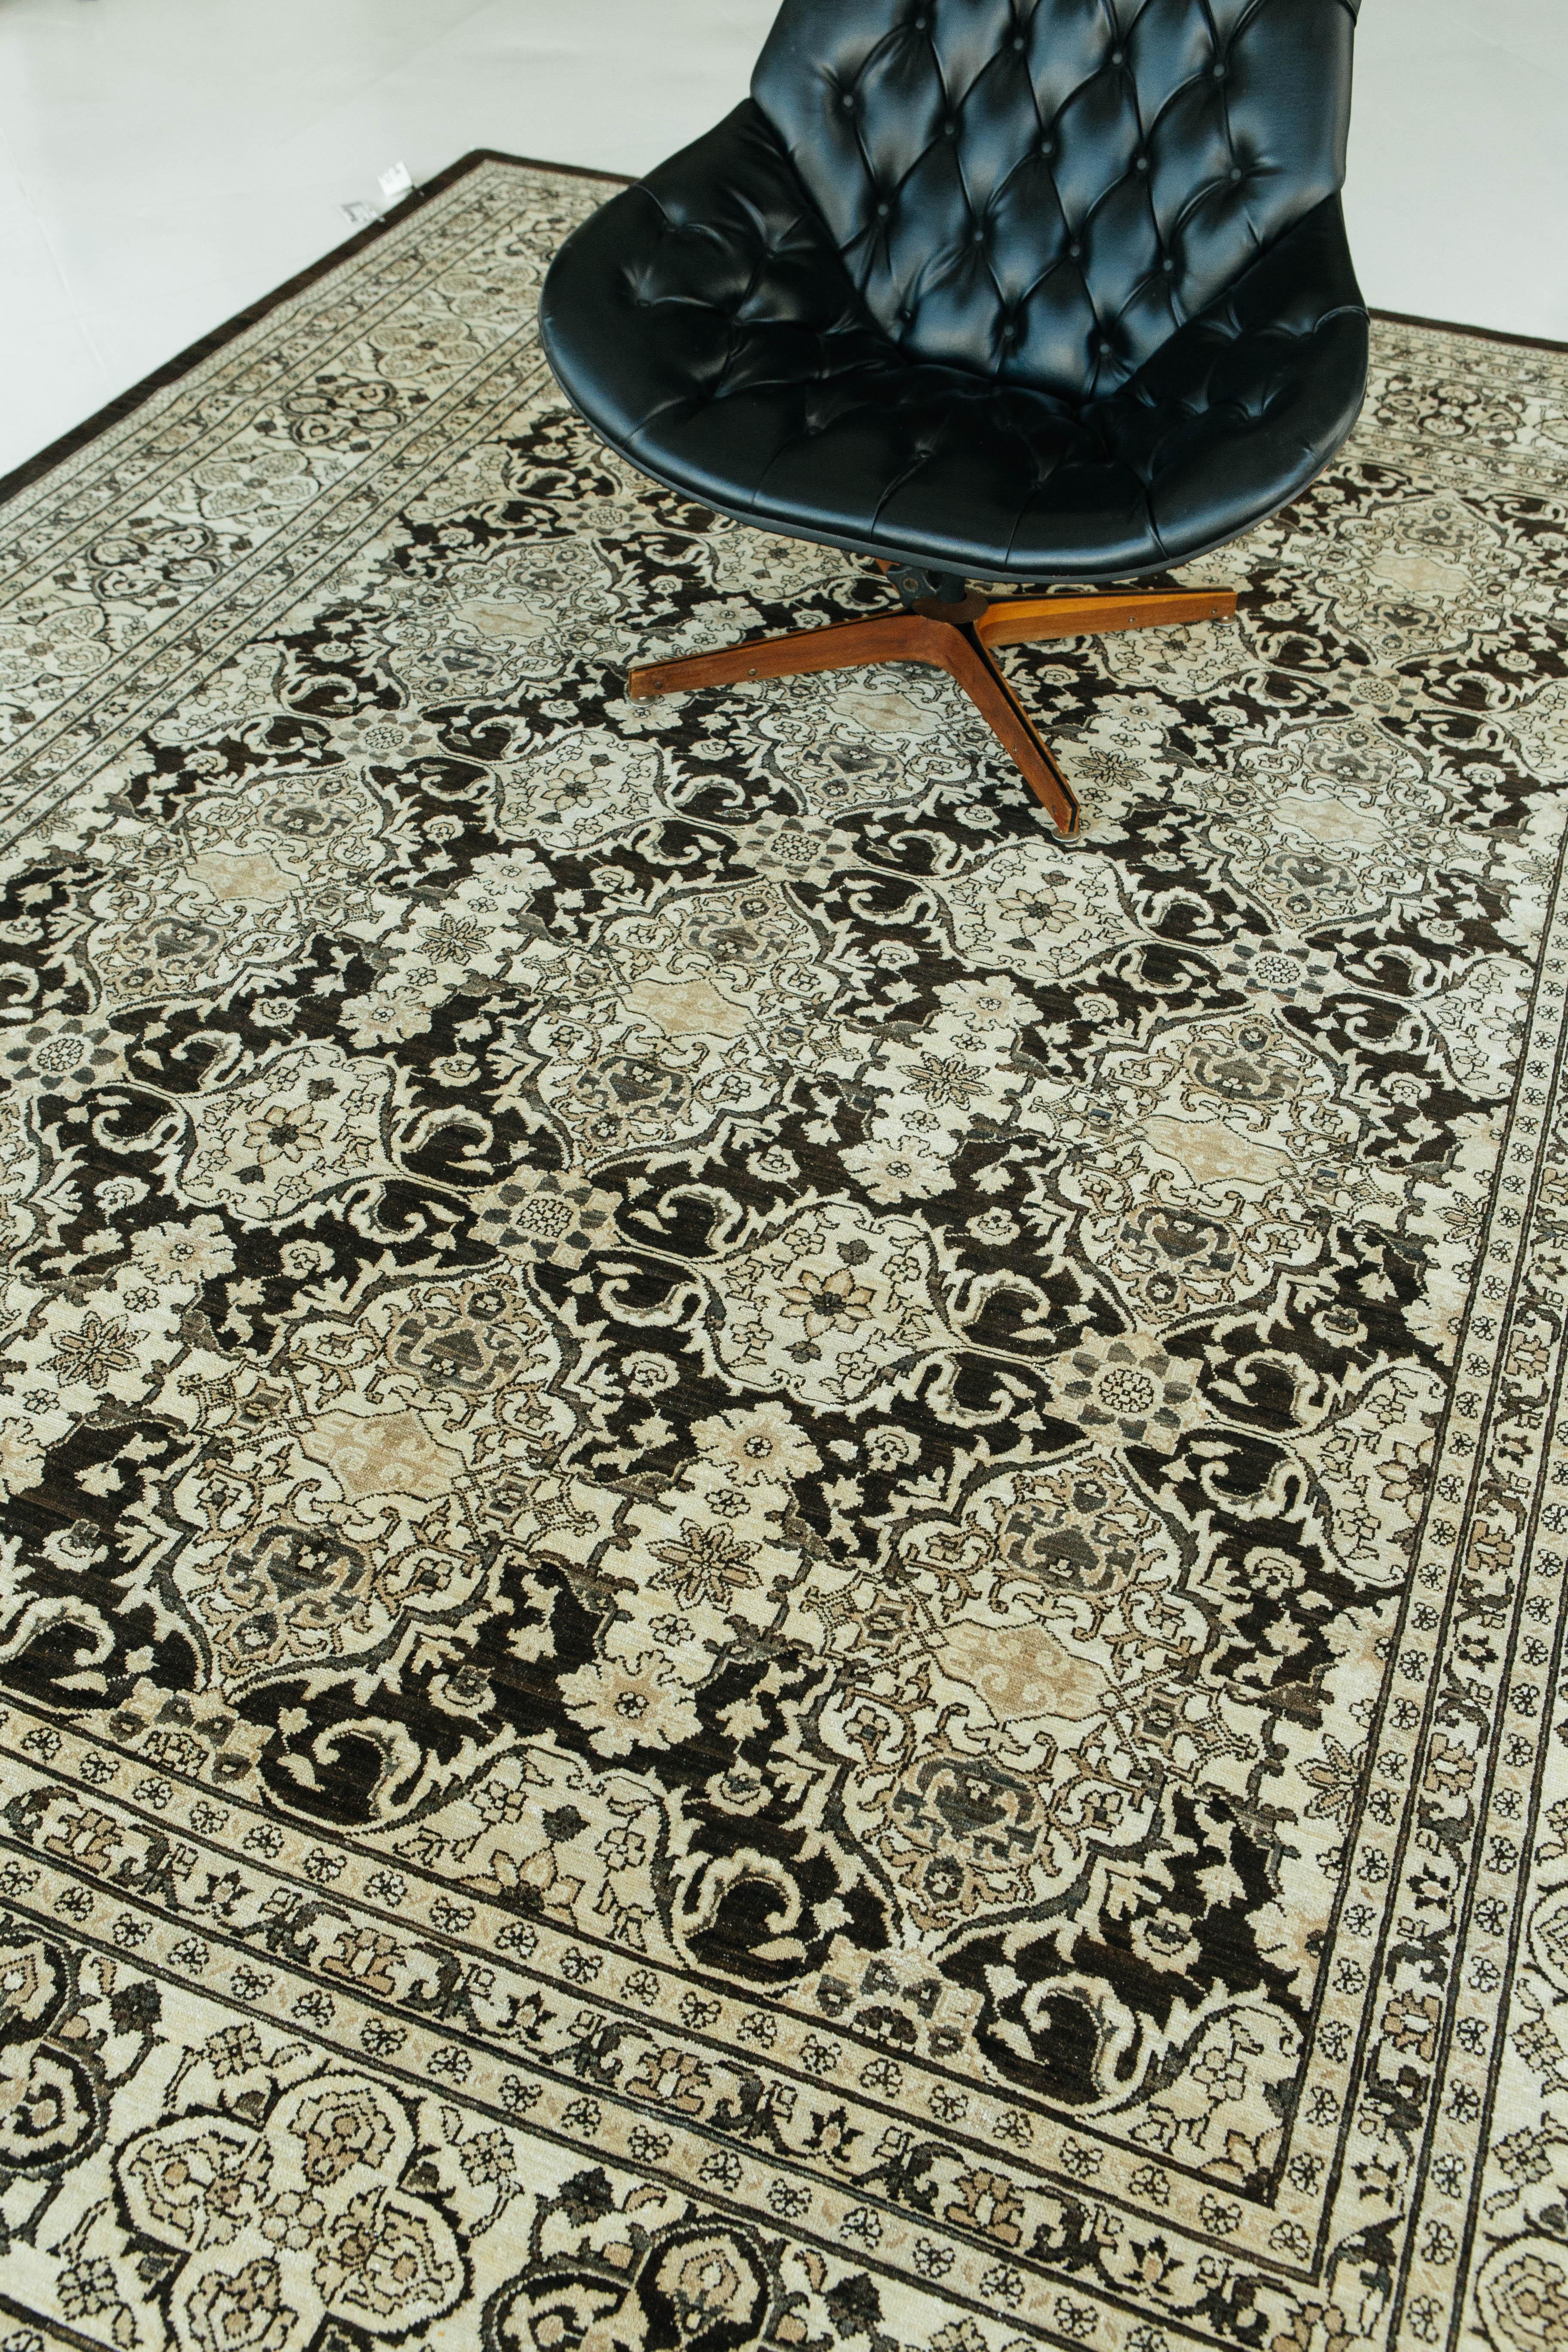 The vintage style black and white Tabriz recreation is nothing shy of luxury and elegance. This traditional recreation encompasses beautiful floral scrolls and traditional jewel-like Persian motifs in the center field. This rug will elevate any